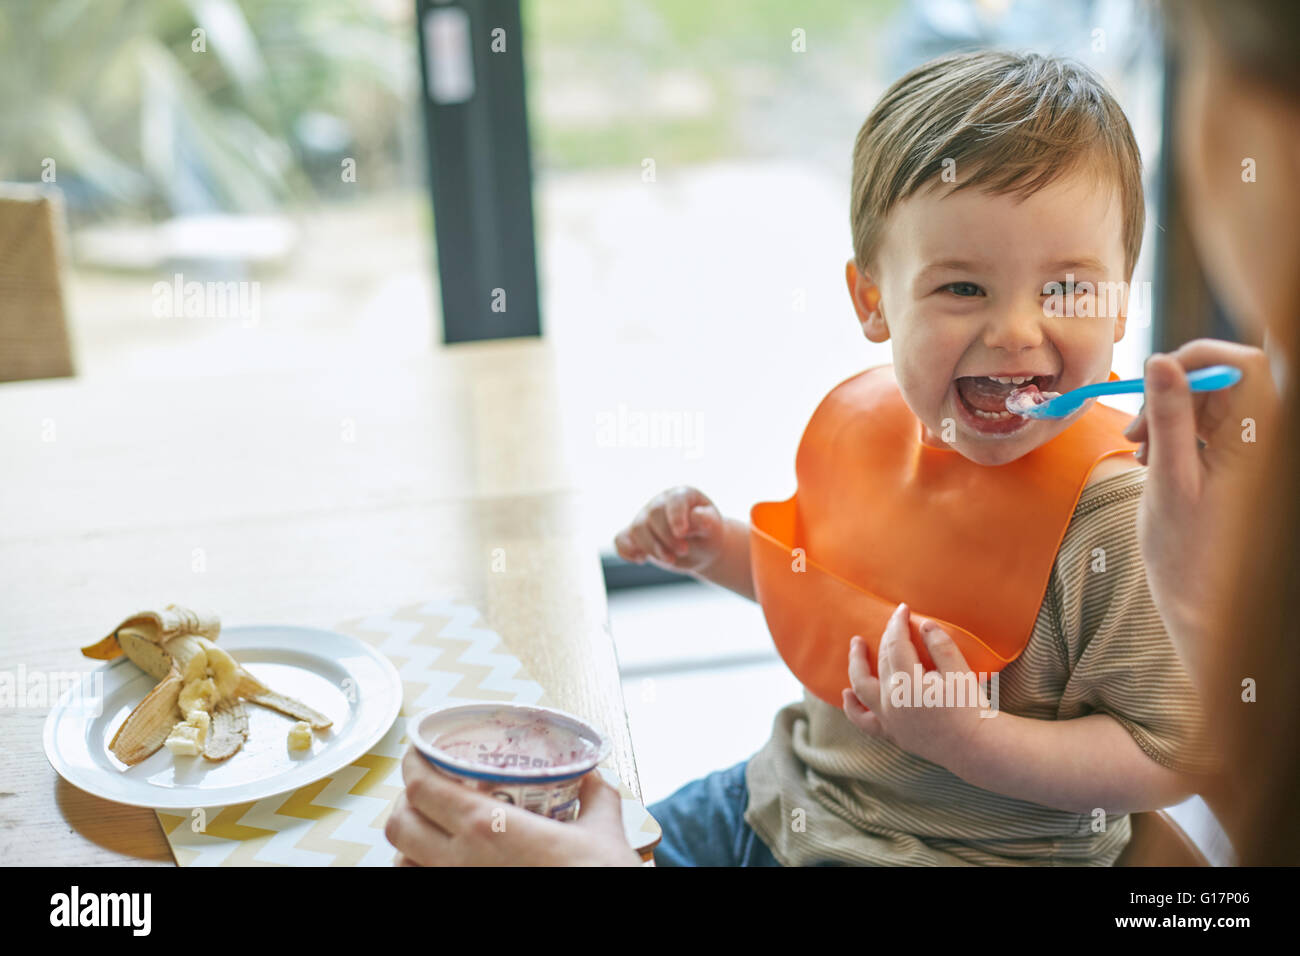 Happy baby boy sitting at table being fed yogurt by mother Stock Photo